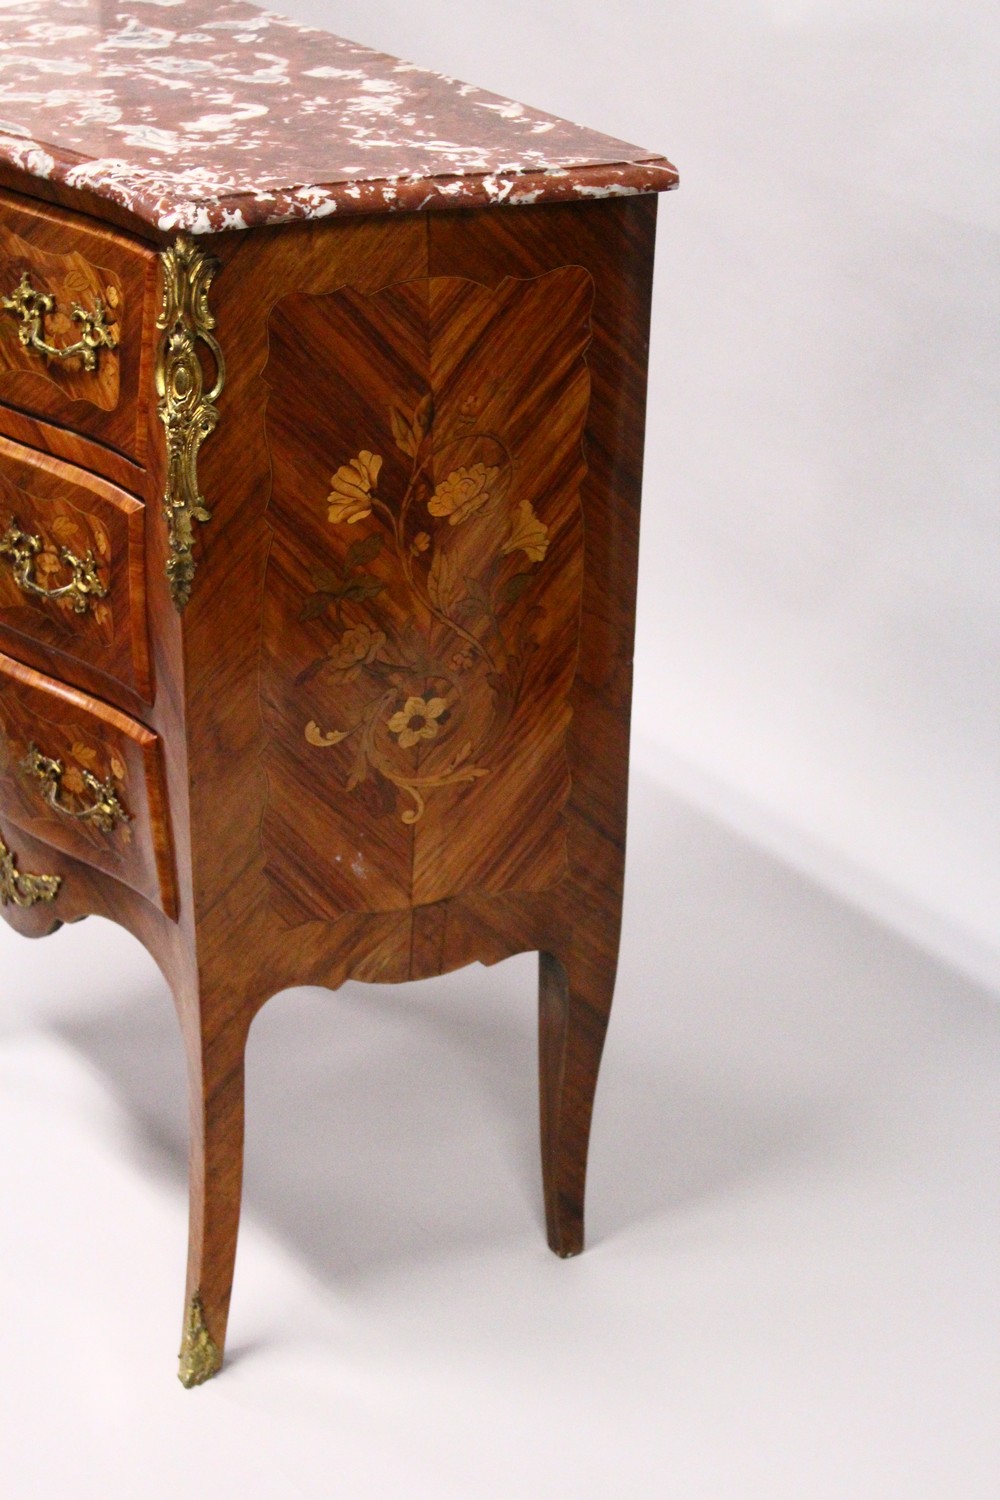 A GOOD SMALL 19TH CENTURY FRENCH KINGWOOD BOMBE COMMODE, with rouge marble top, ormolu mounts, three - Image 2 of 4